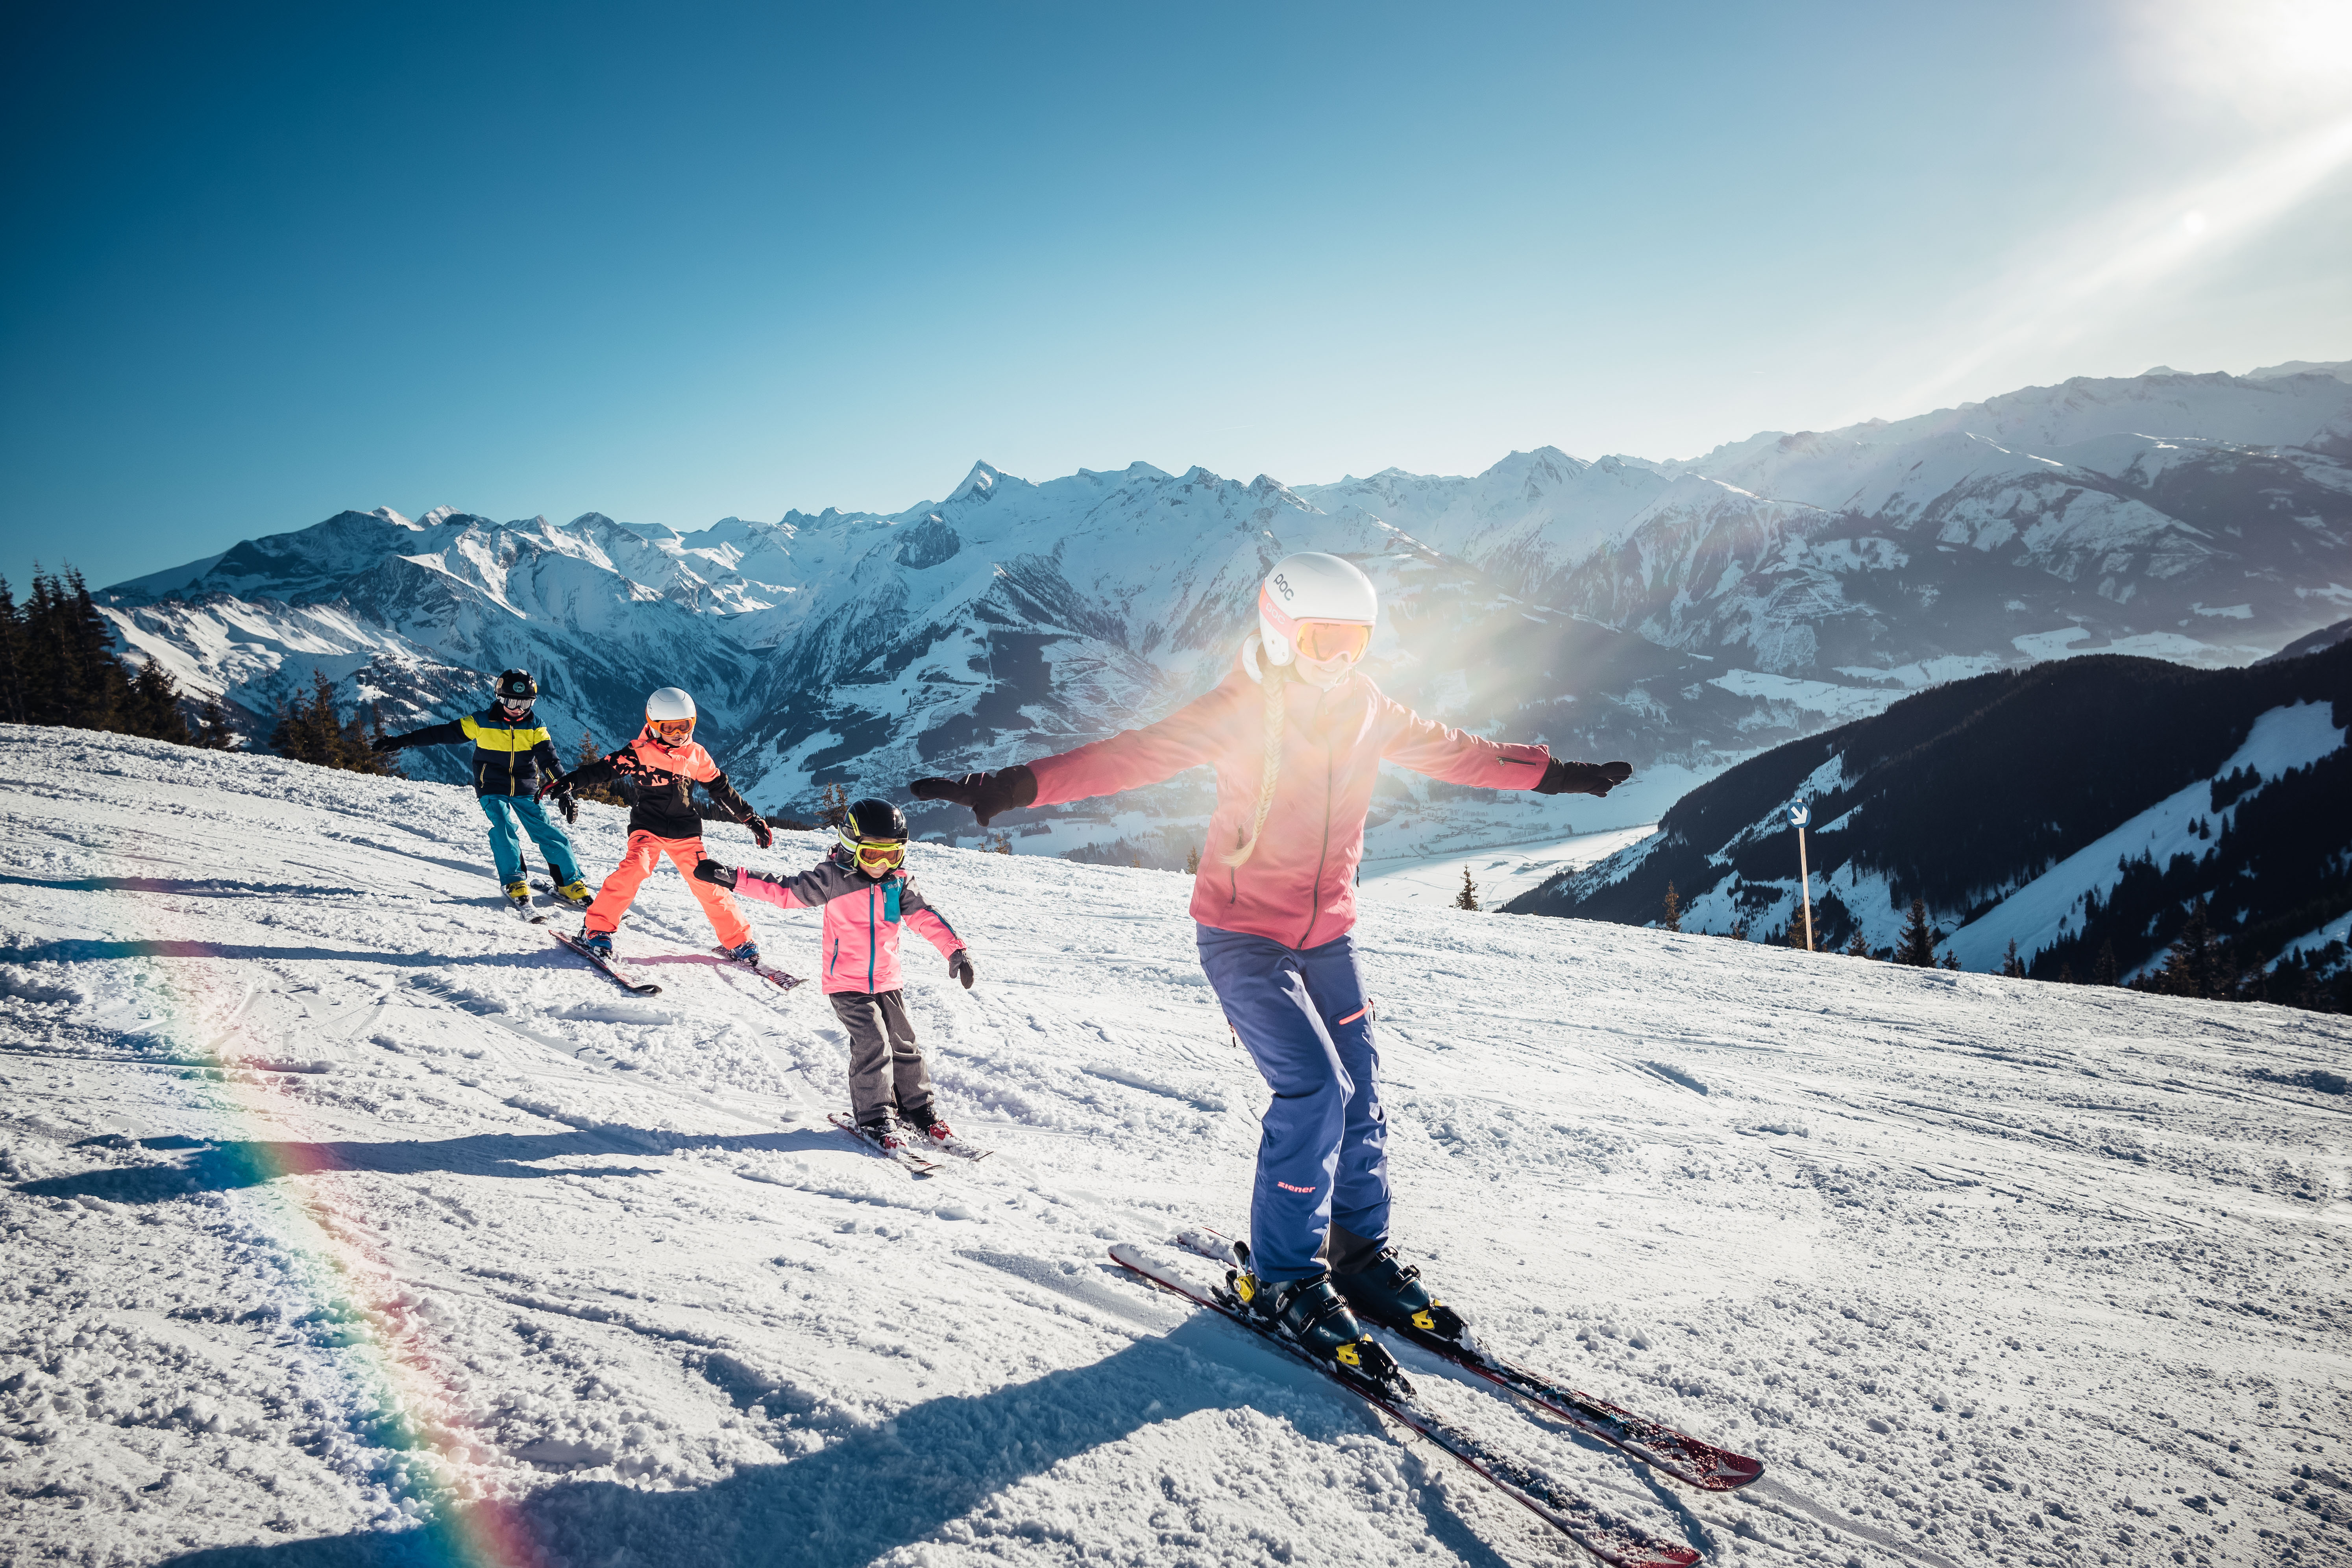 Skiing (better) at last: Why a ski course is well worth it